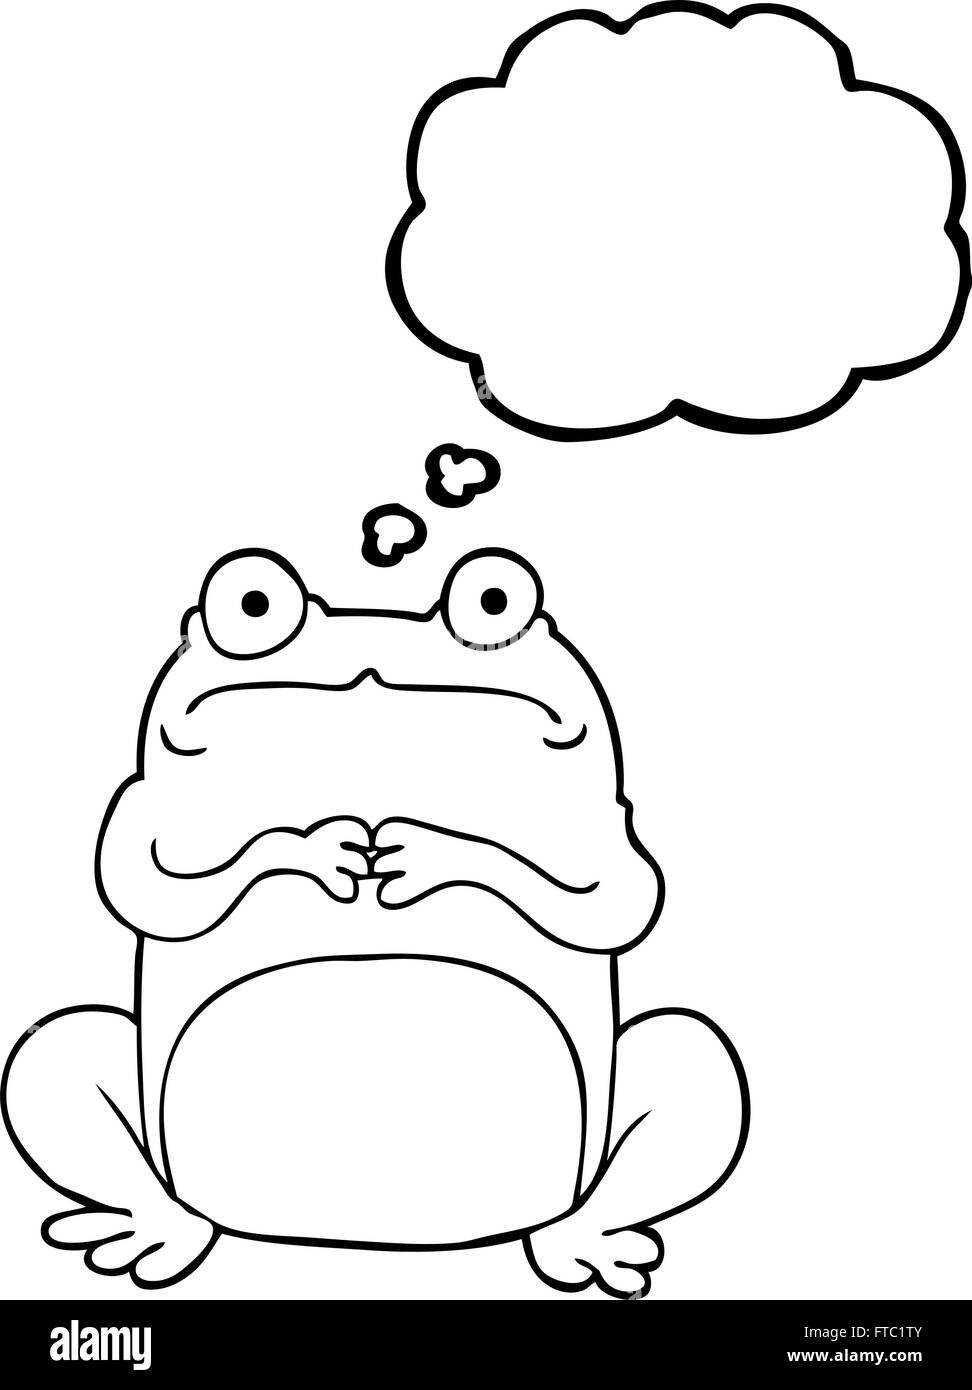 freehand drawn thought bubble cartoon nervous frog Stock Vector